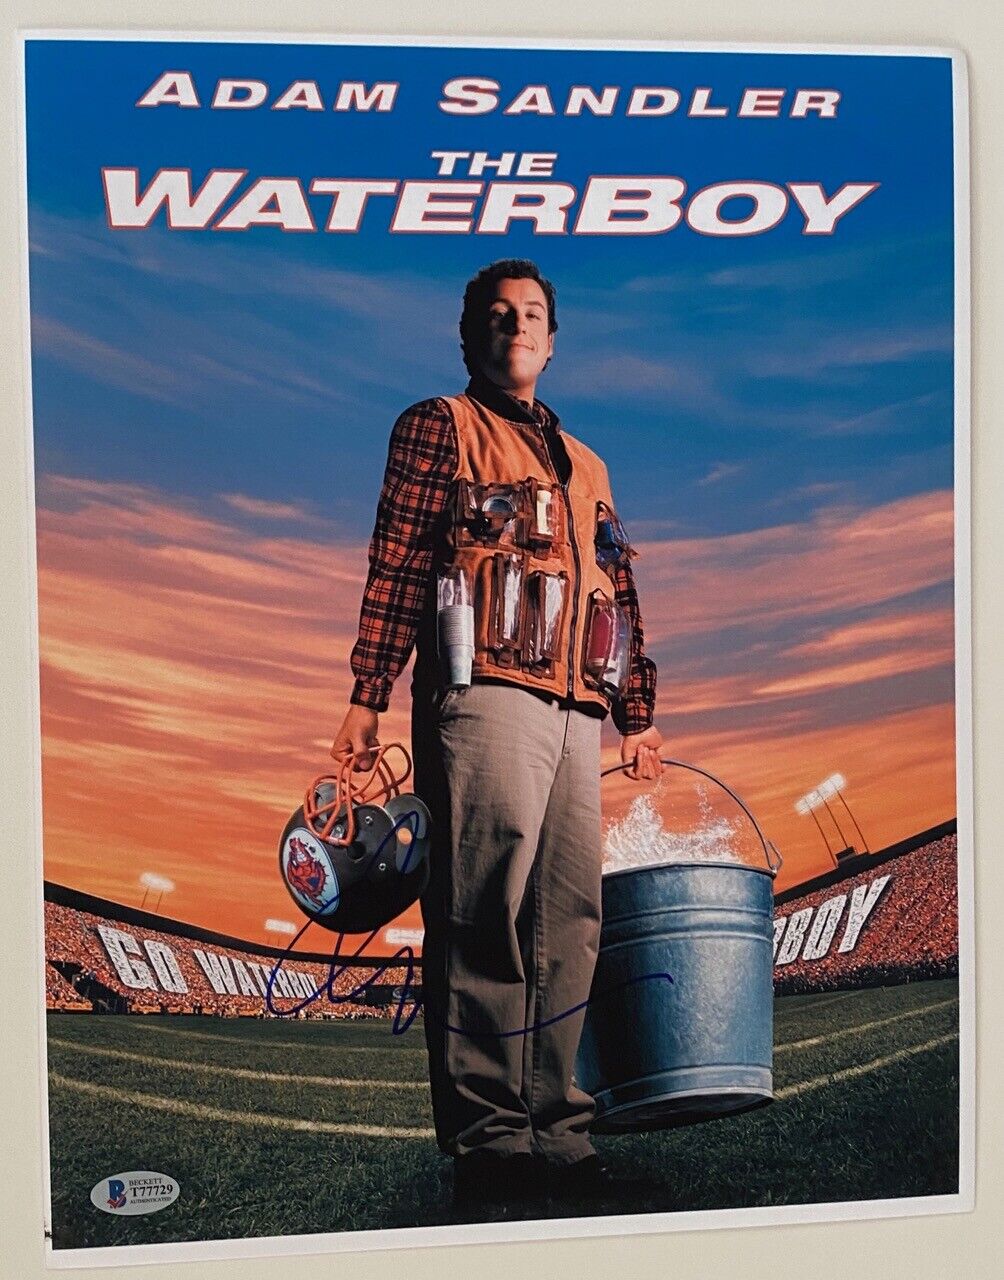 Adam Sandler Signed Autographed 11x14 Photo Poster painting Poster THE WATERBOY Beckett BAS COA